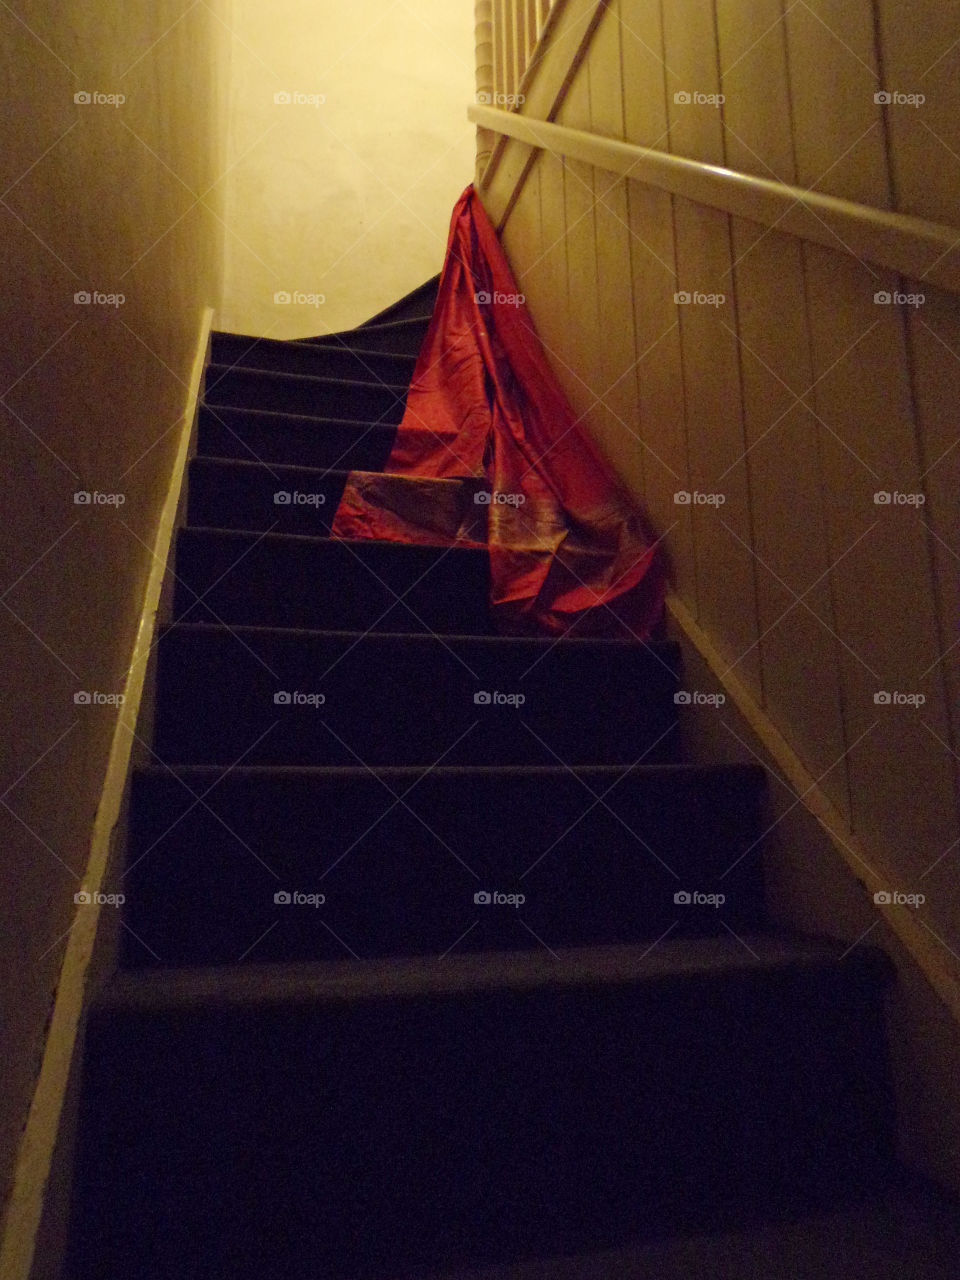 A red sari on the stairs of an old house